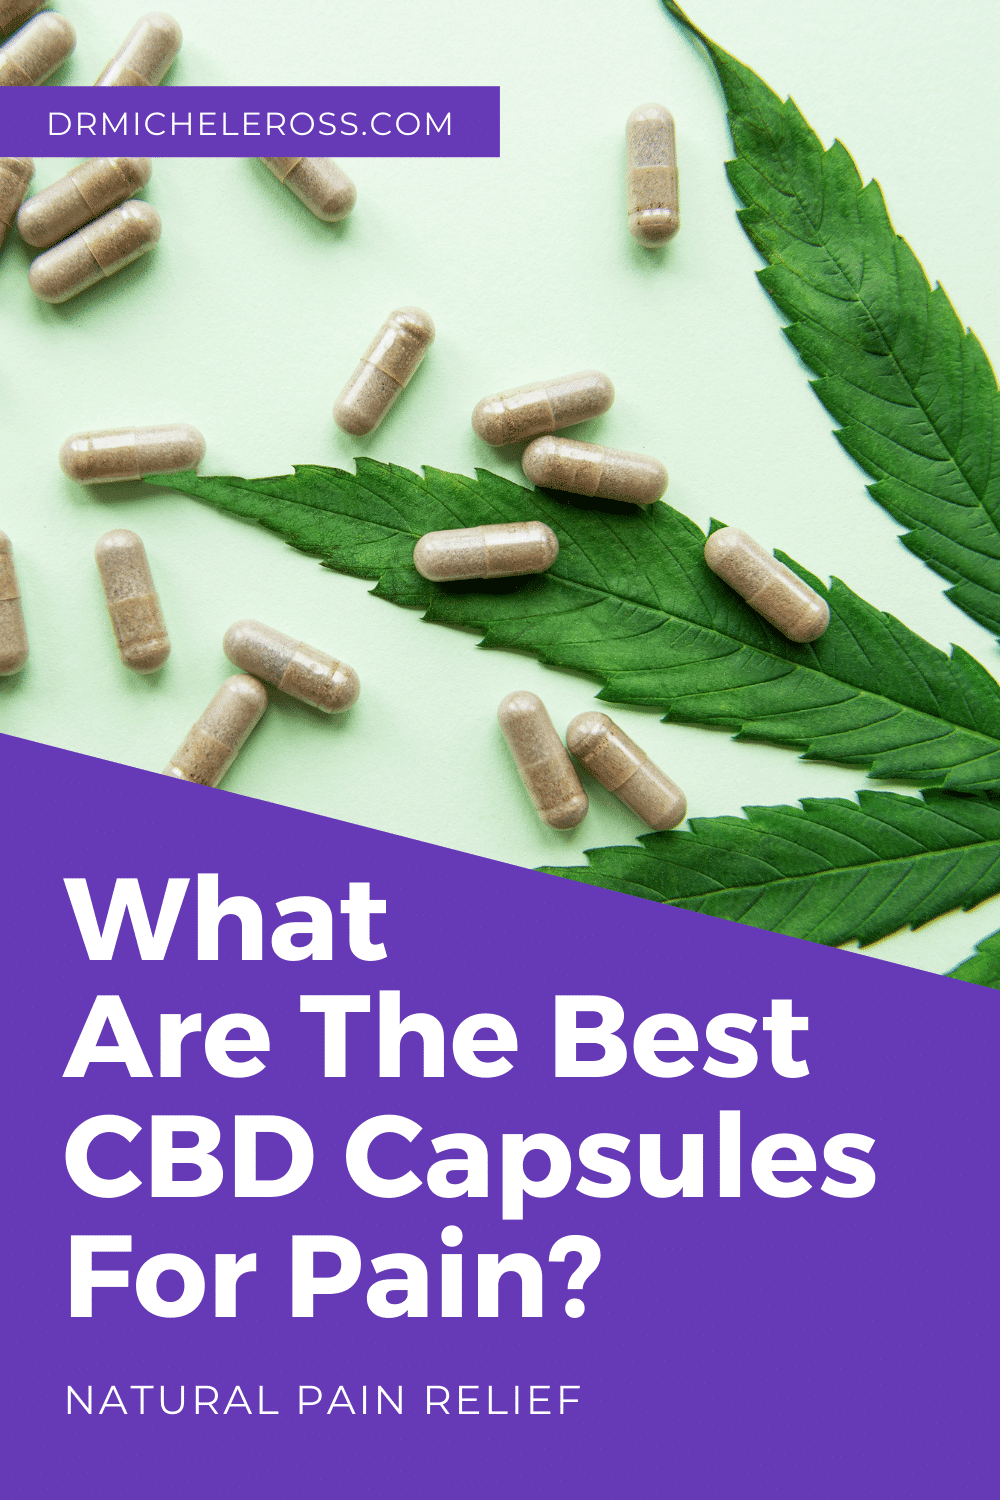 What Are The Best CBD Capsules For Pain?